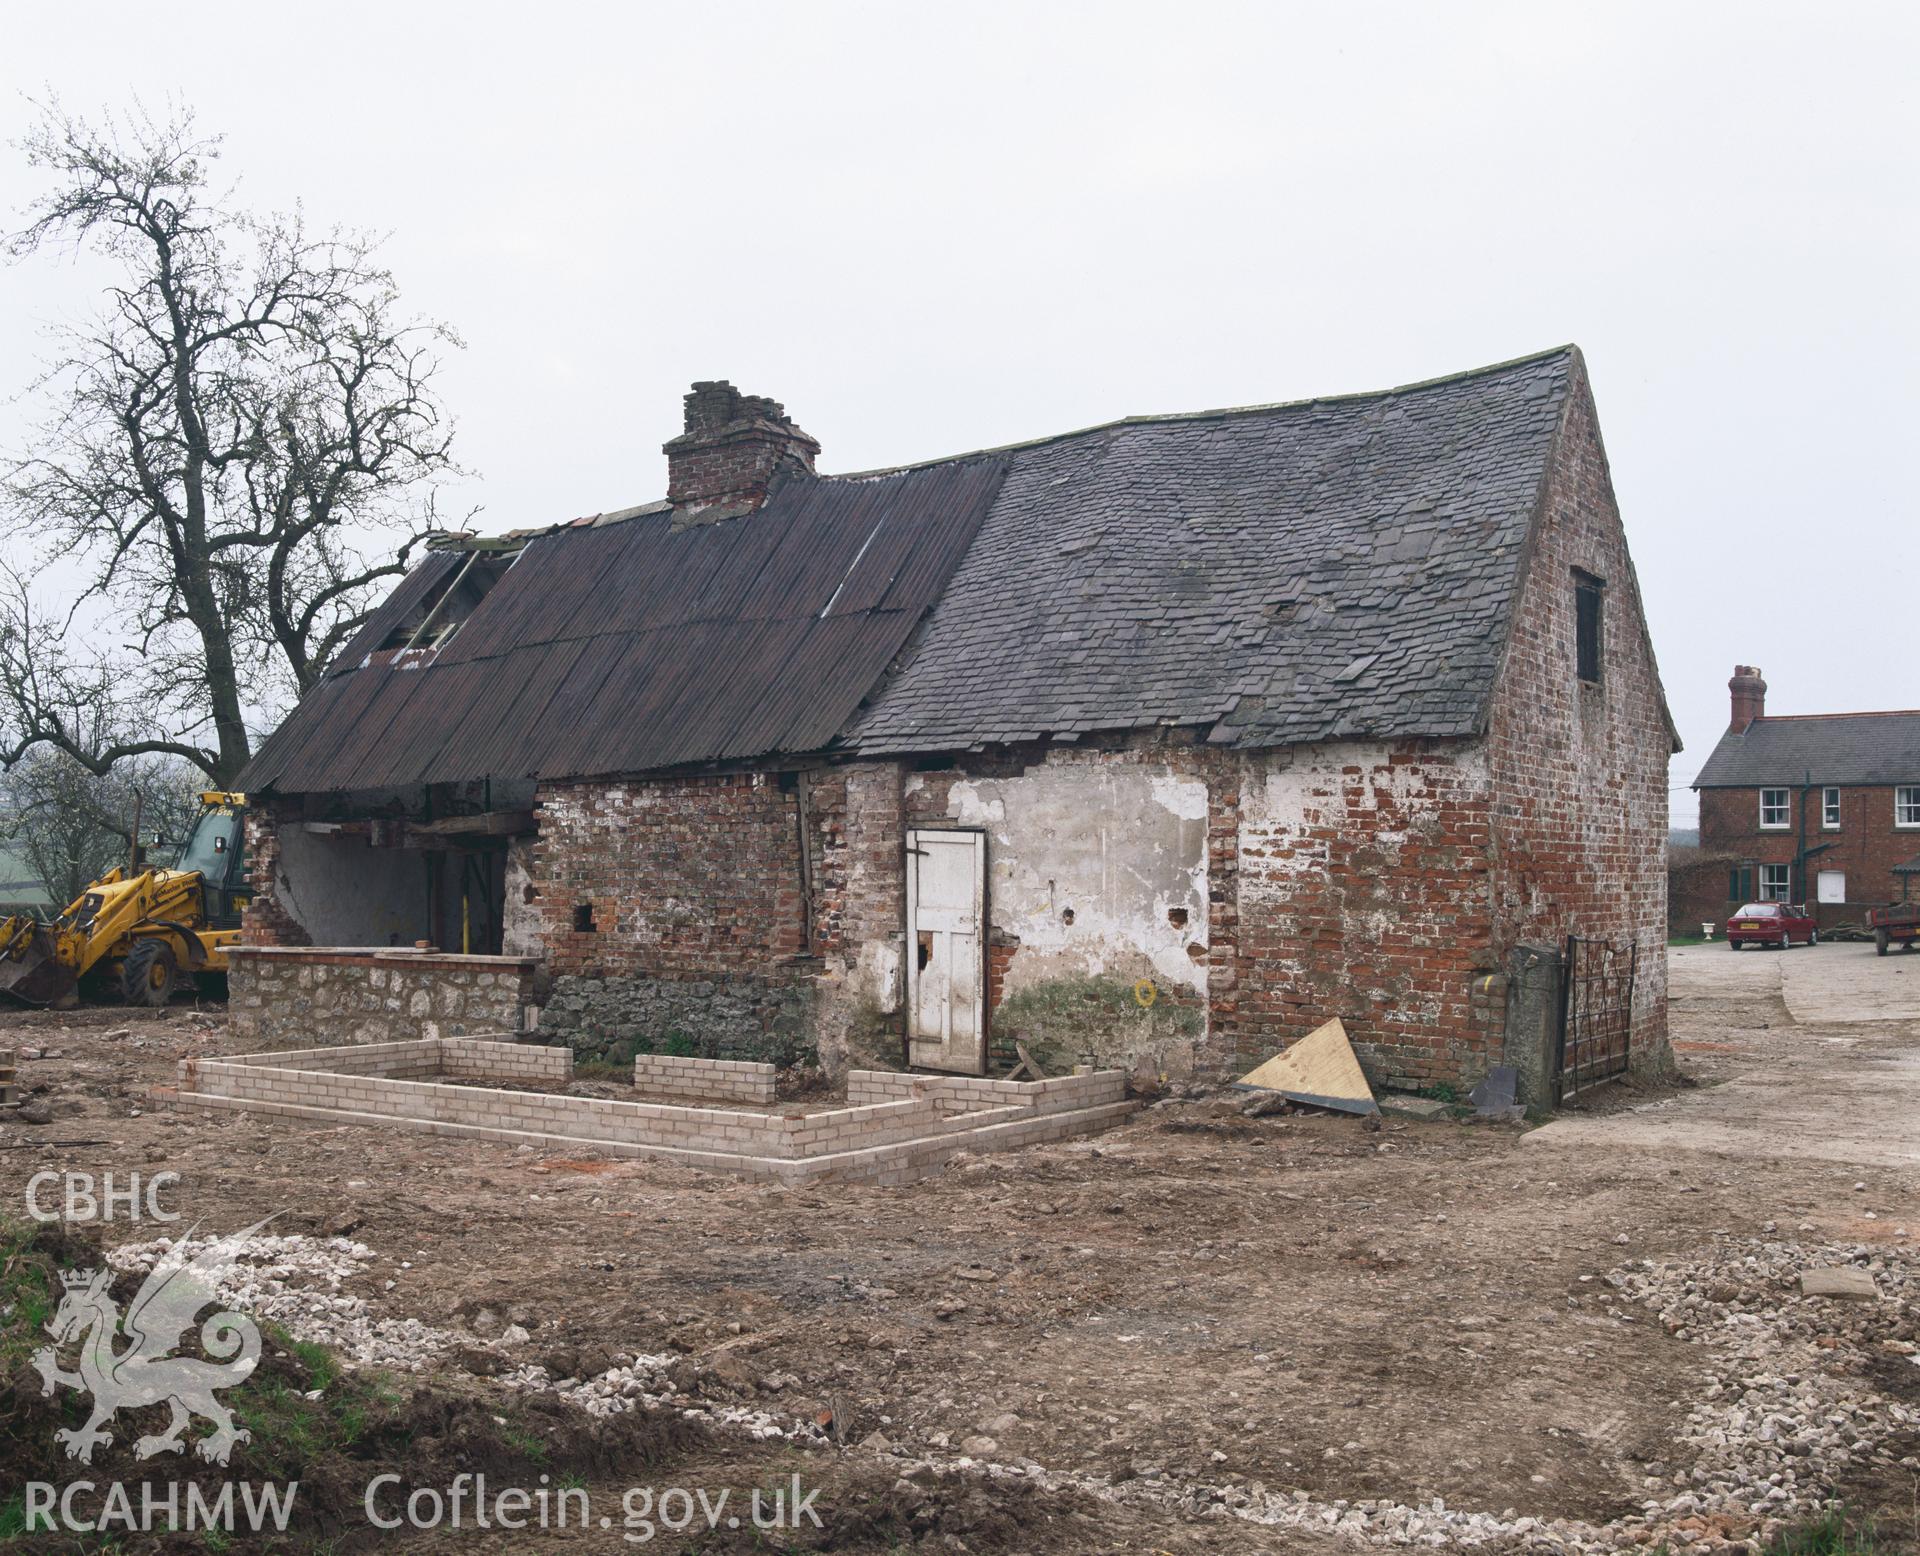 RCAHMW colour transparency showing exterior view of the rear of Waen Farmhouse, St Asaph, taken by Iain Wright, 2003.